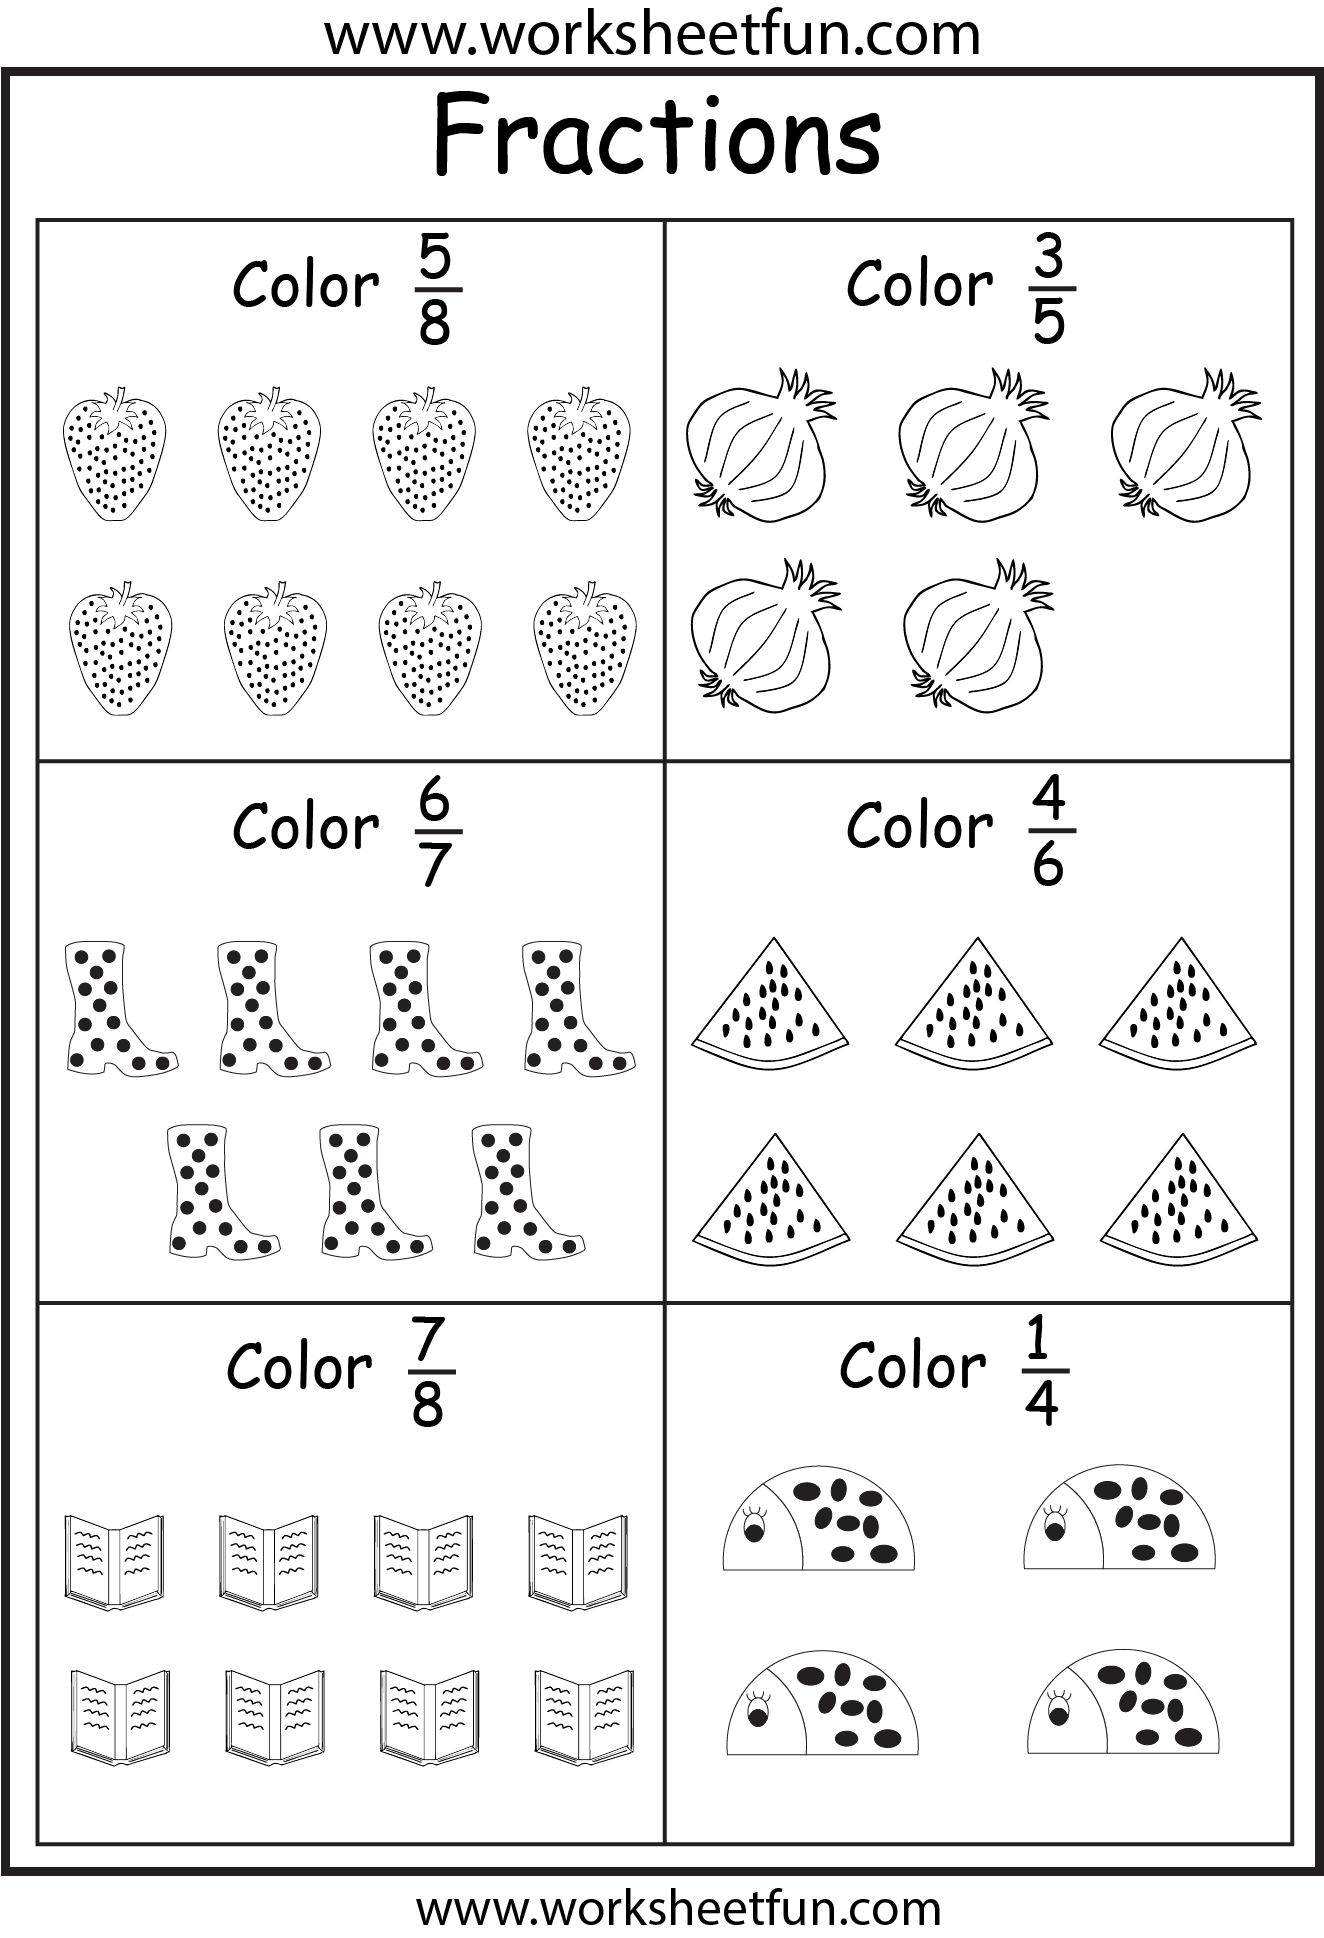 Search Results For Equivalent Fraction Coloring Worksheets Calendar 2015